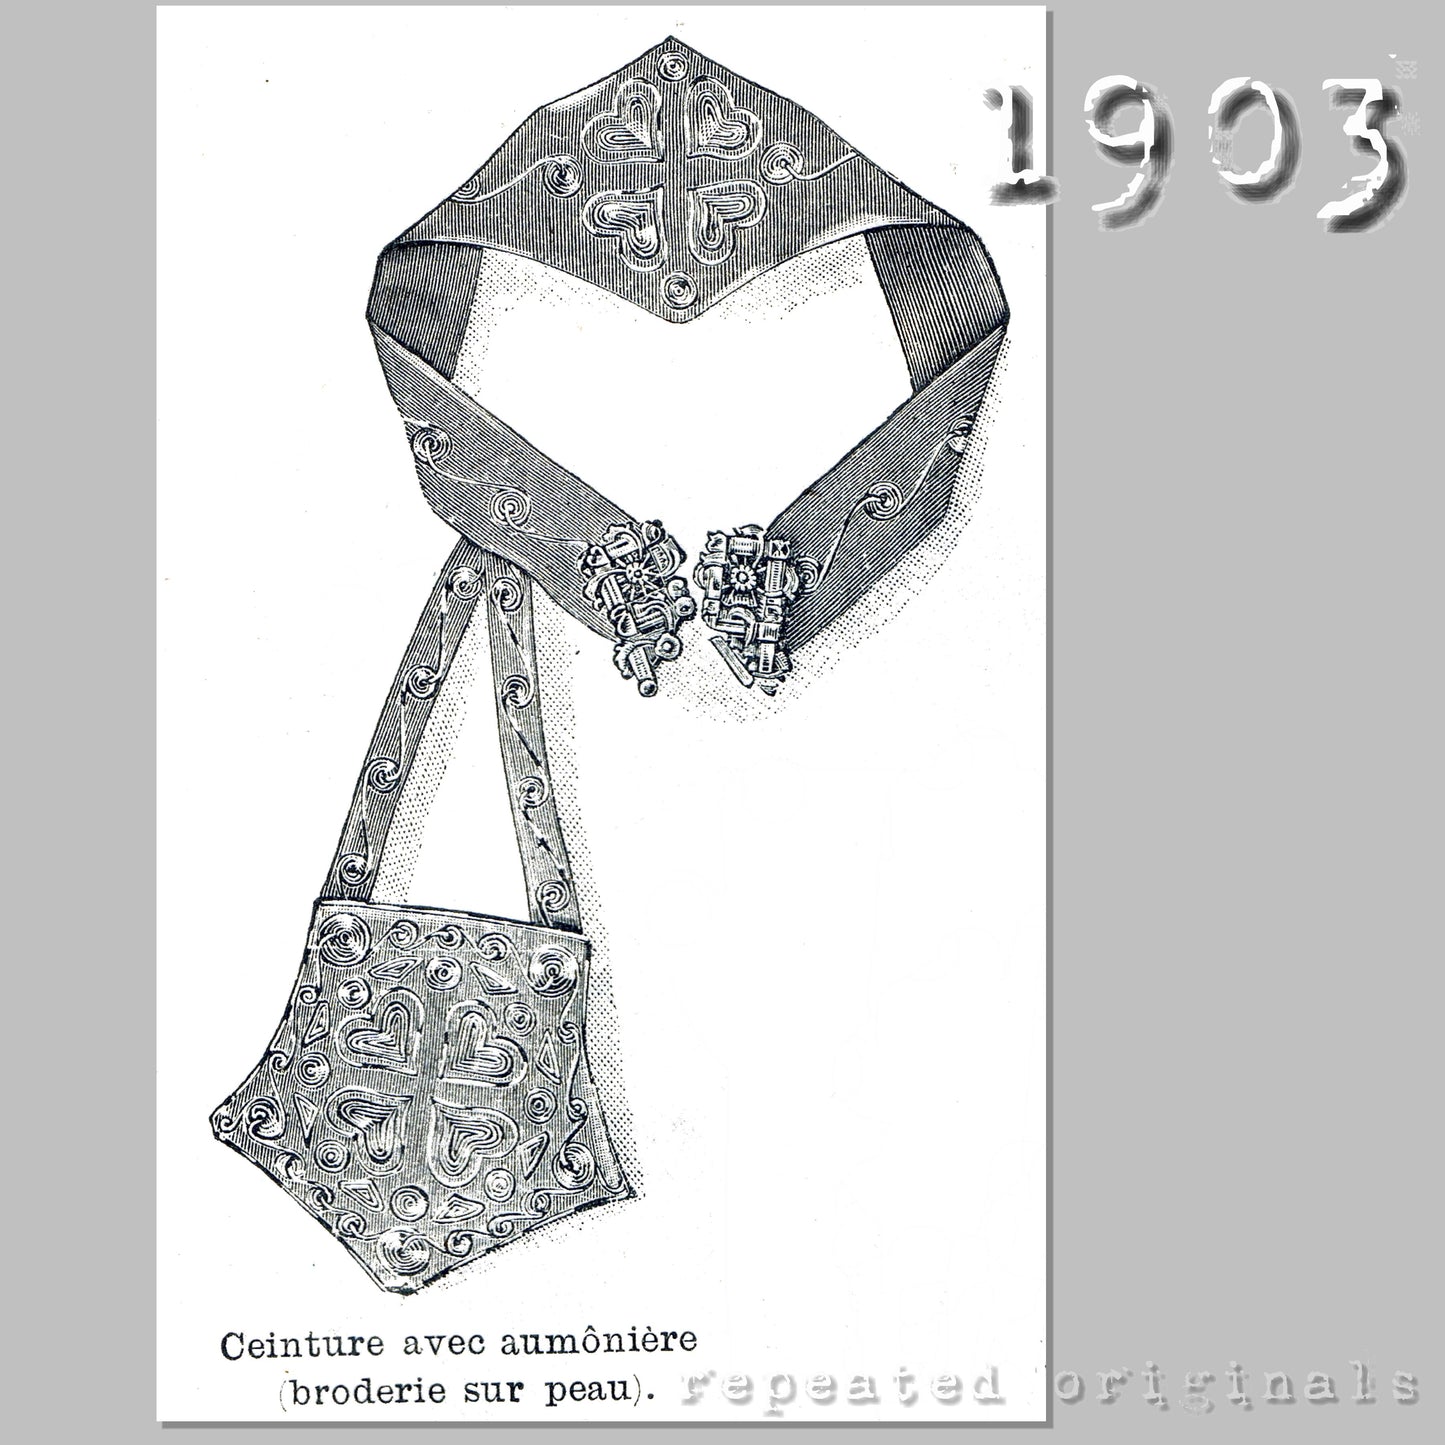 1903 Belt with Purse (Embroidered on Chamois Leather) Sewing Pattern - INSTANT DOWNLOAD PDF